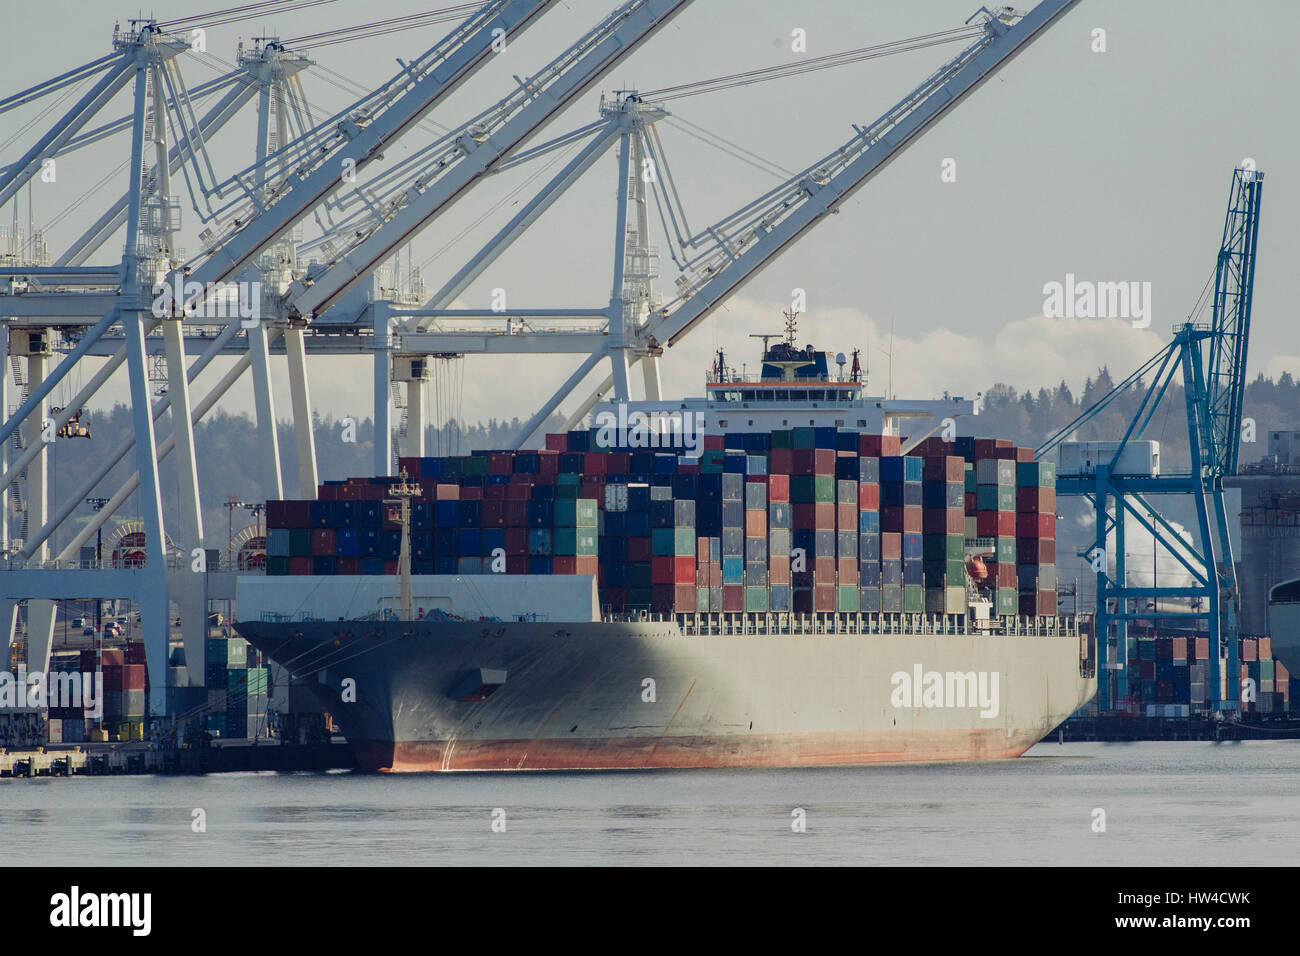 Cargo containers on freighter at shipping port Stock Photo